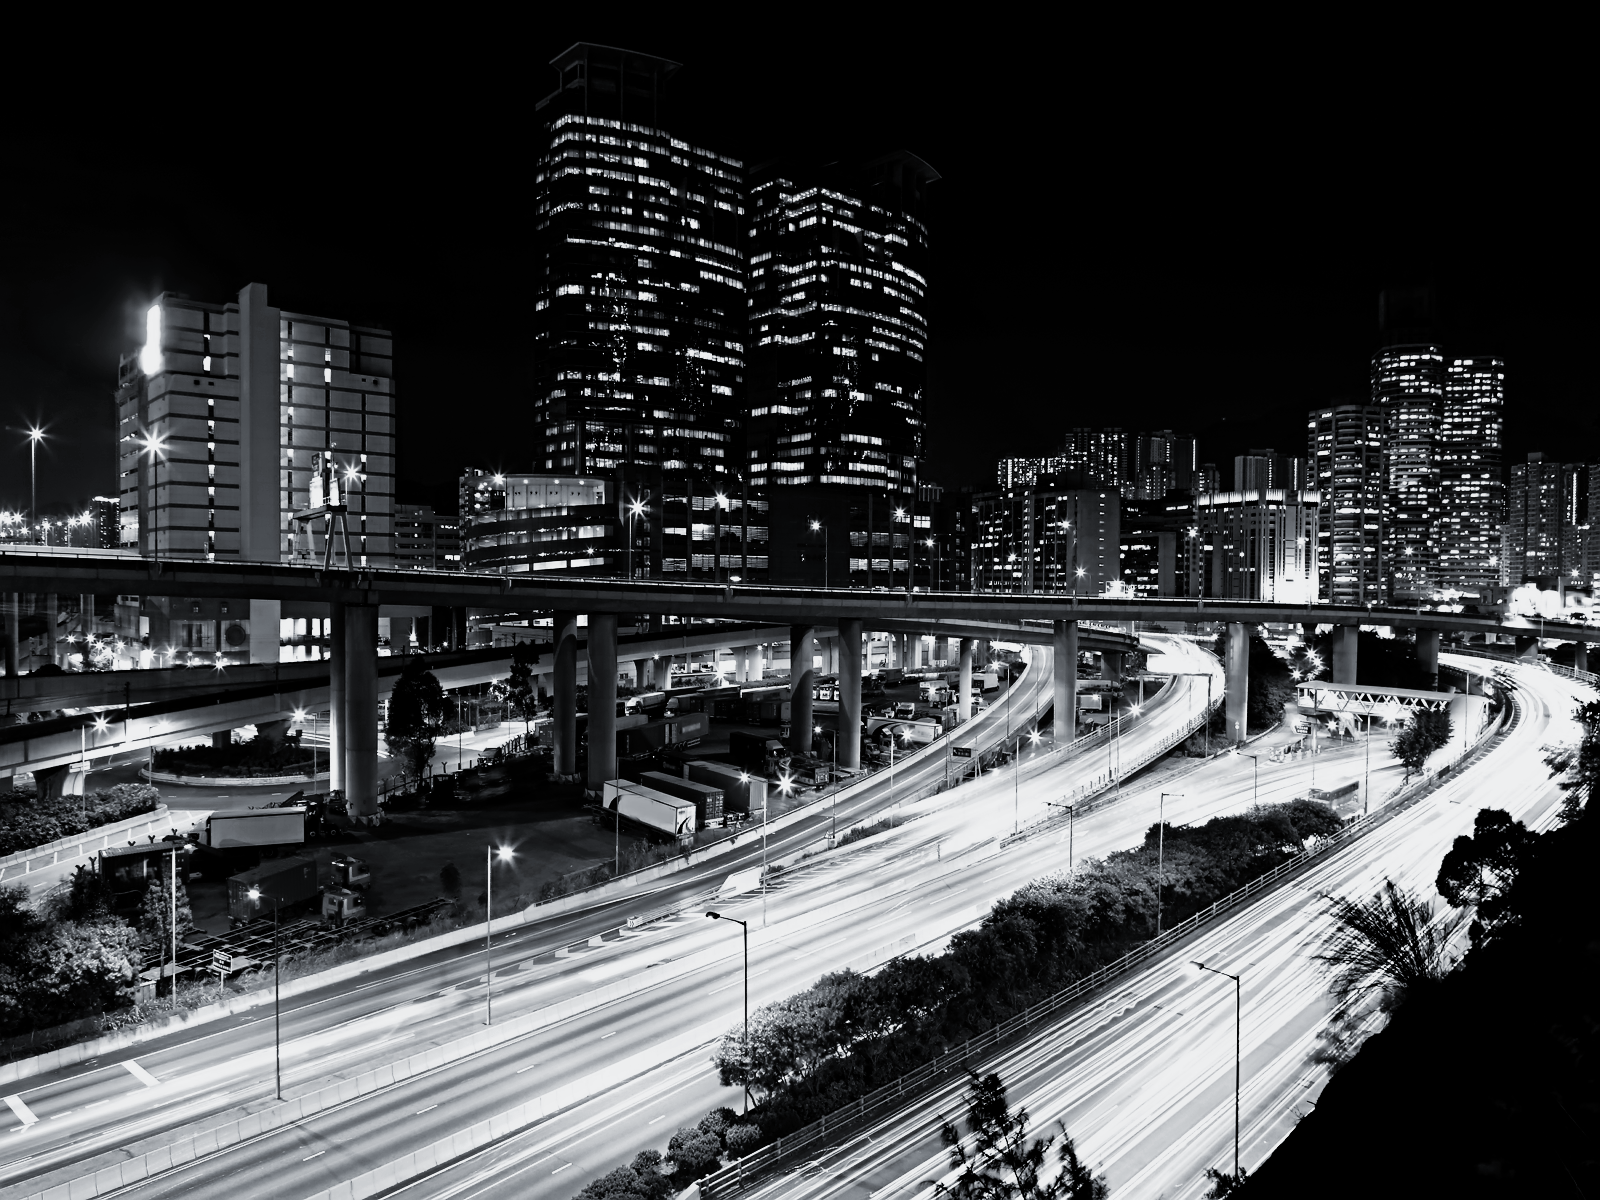 City Background Image Black And White Hd - HD Wallpaper 